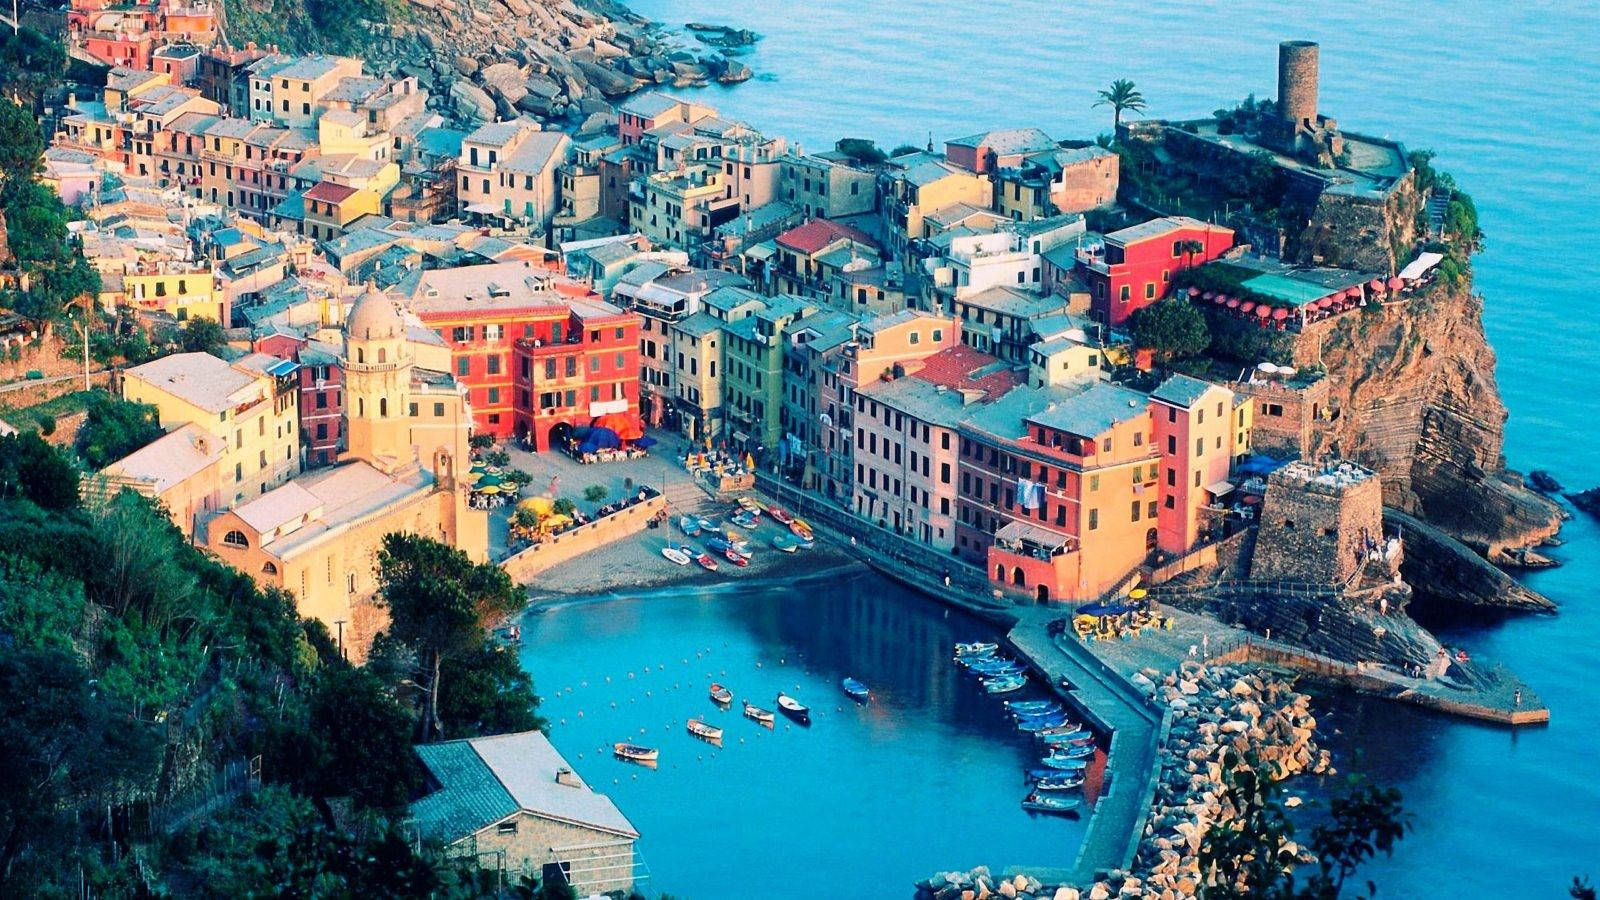 Capturing The Mesmerizing Views Of Vernazza, Italy - Travel Postcard-perfect!